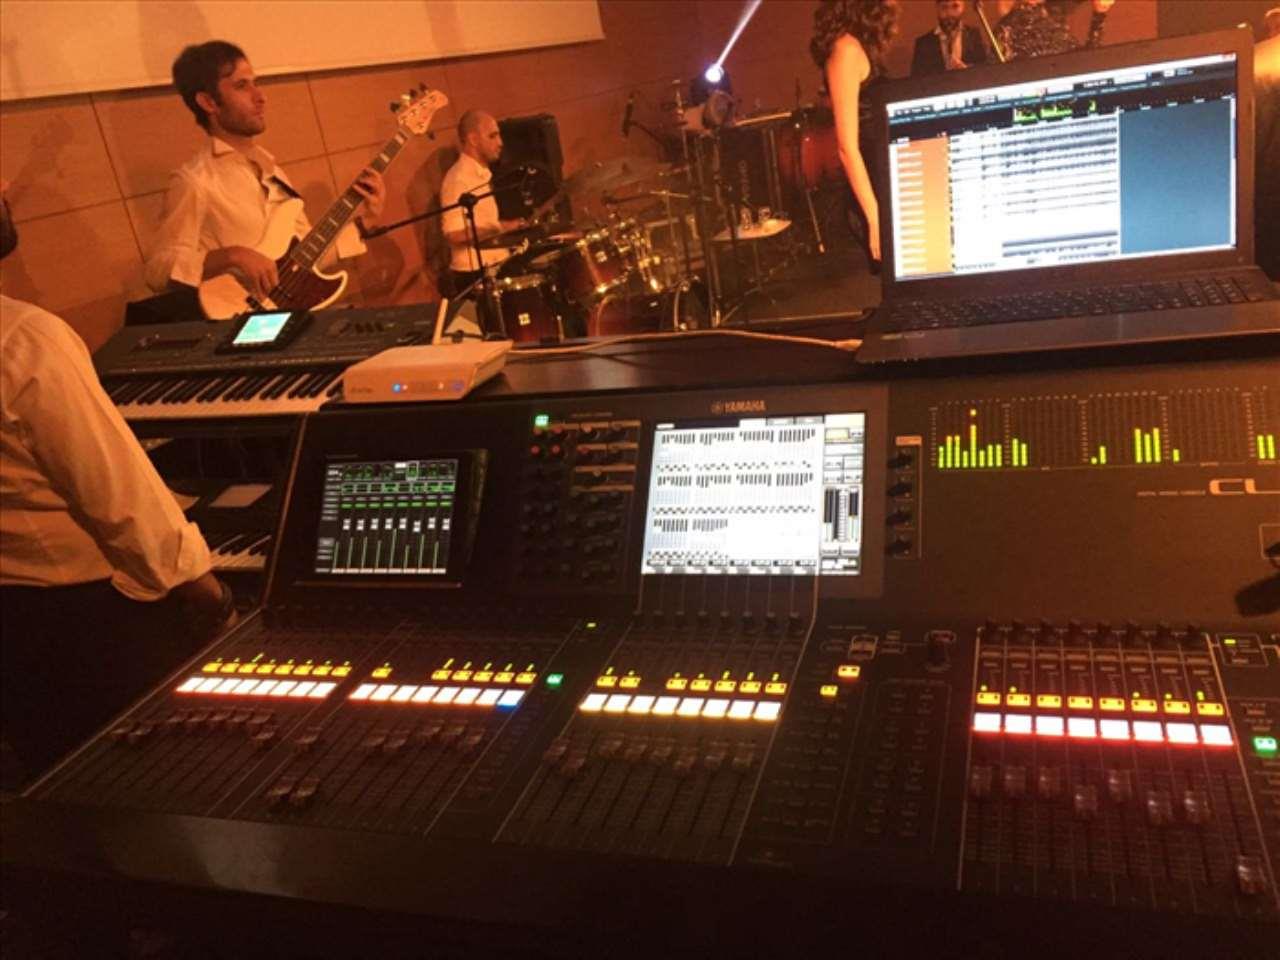 POINT HOTEL MULTITRACK RECORD LIVE CONCERT